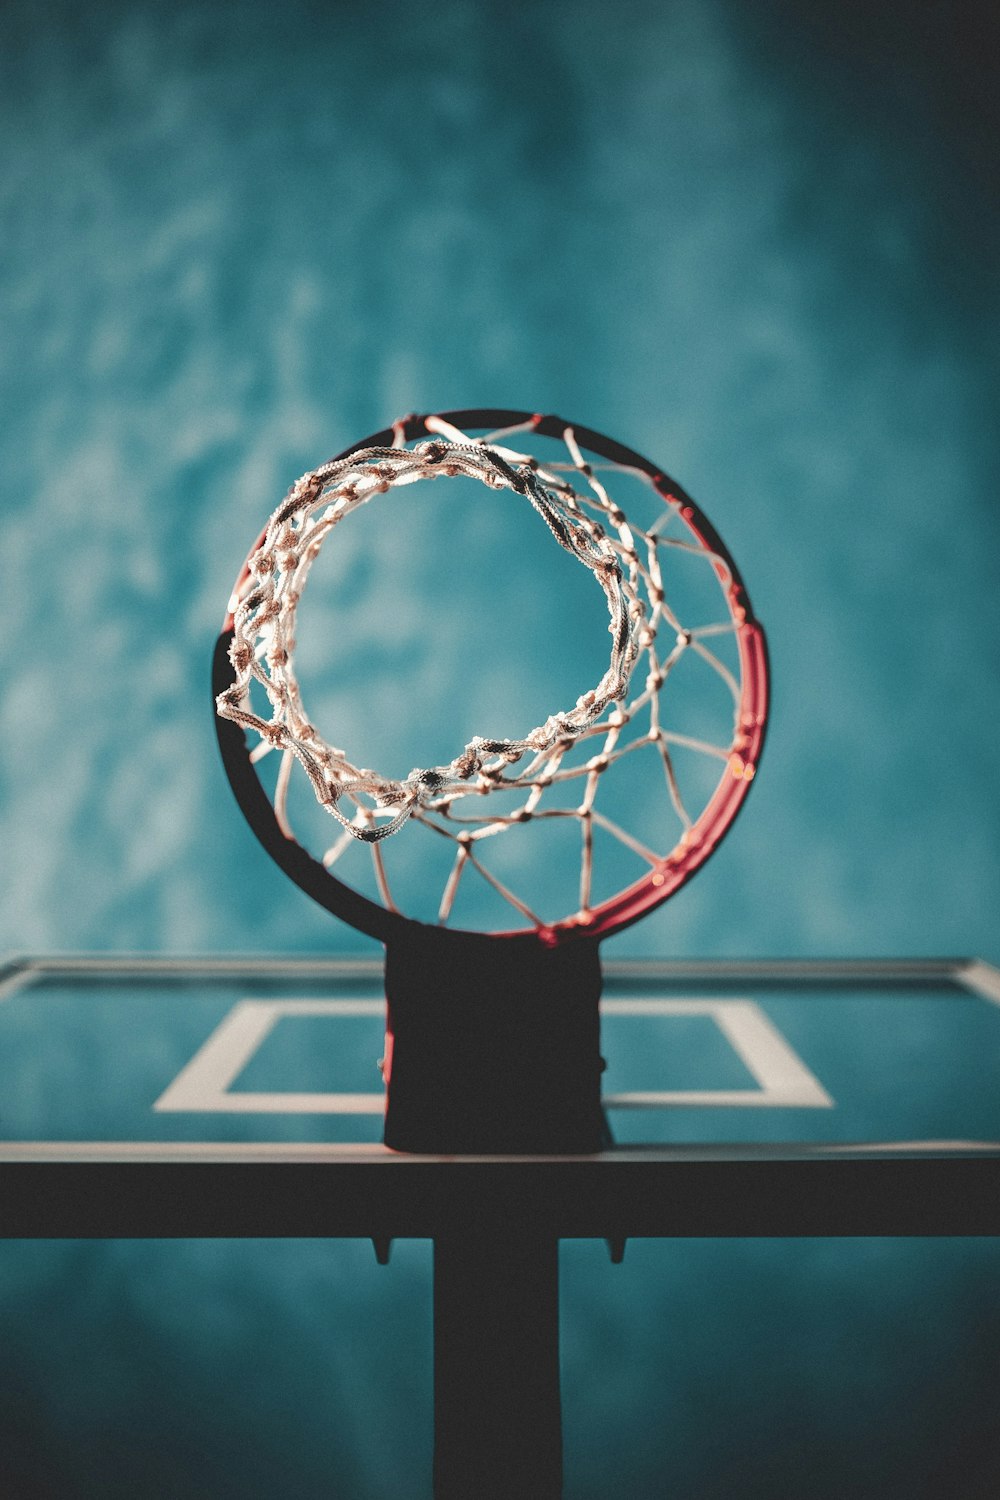 500+ Basketball Court Pictures  Download Free Images on Unsplash